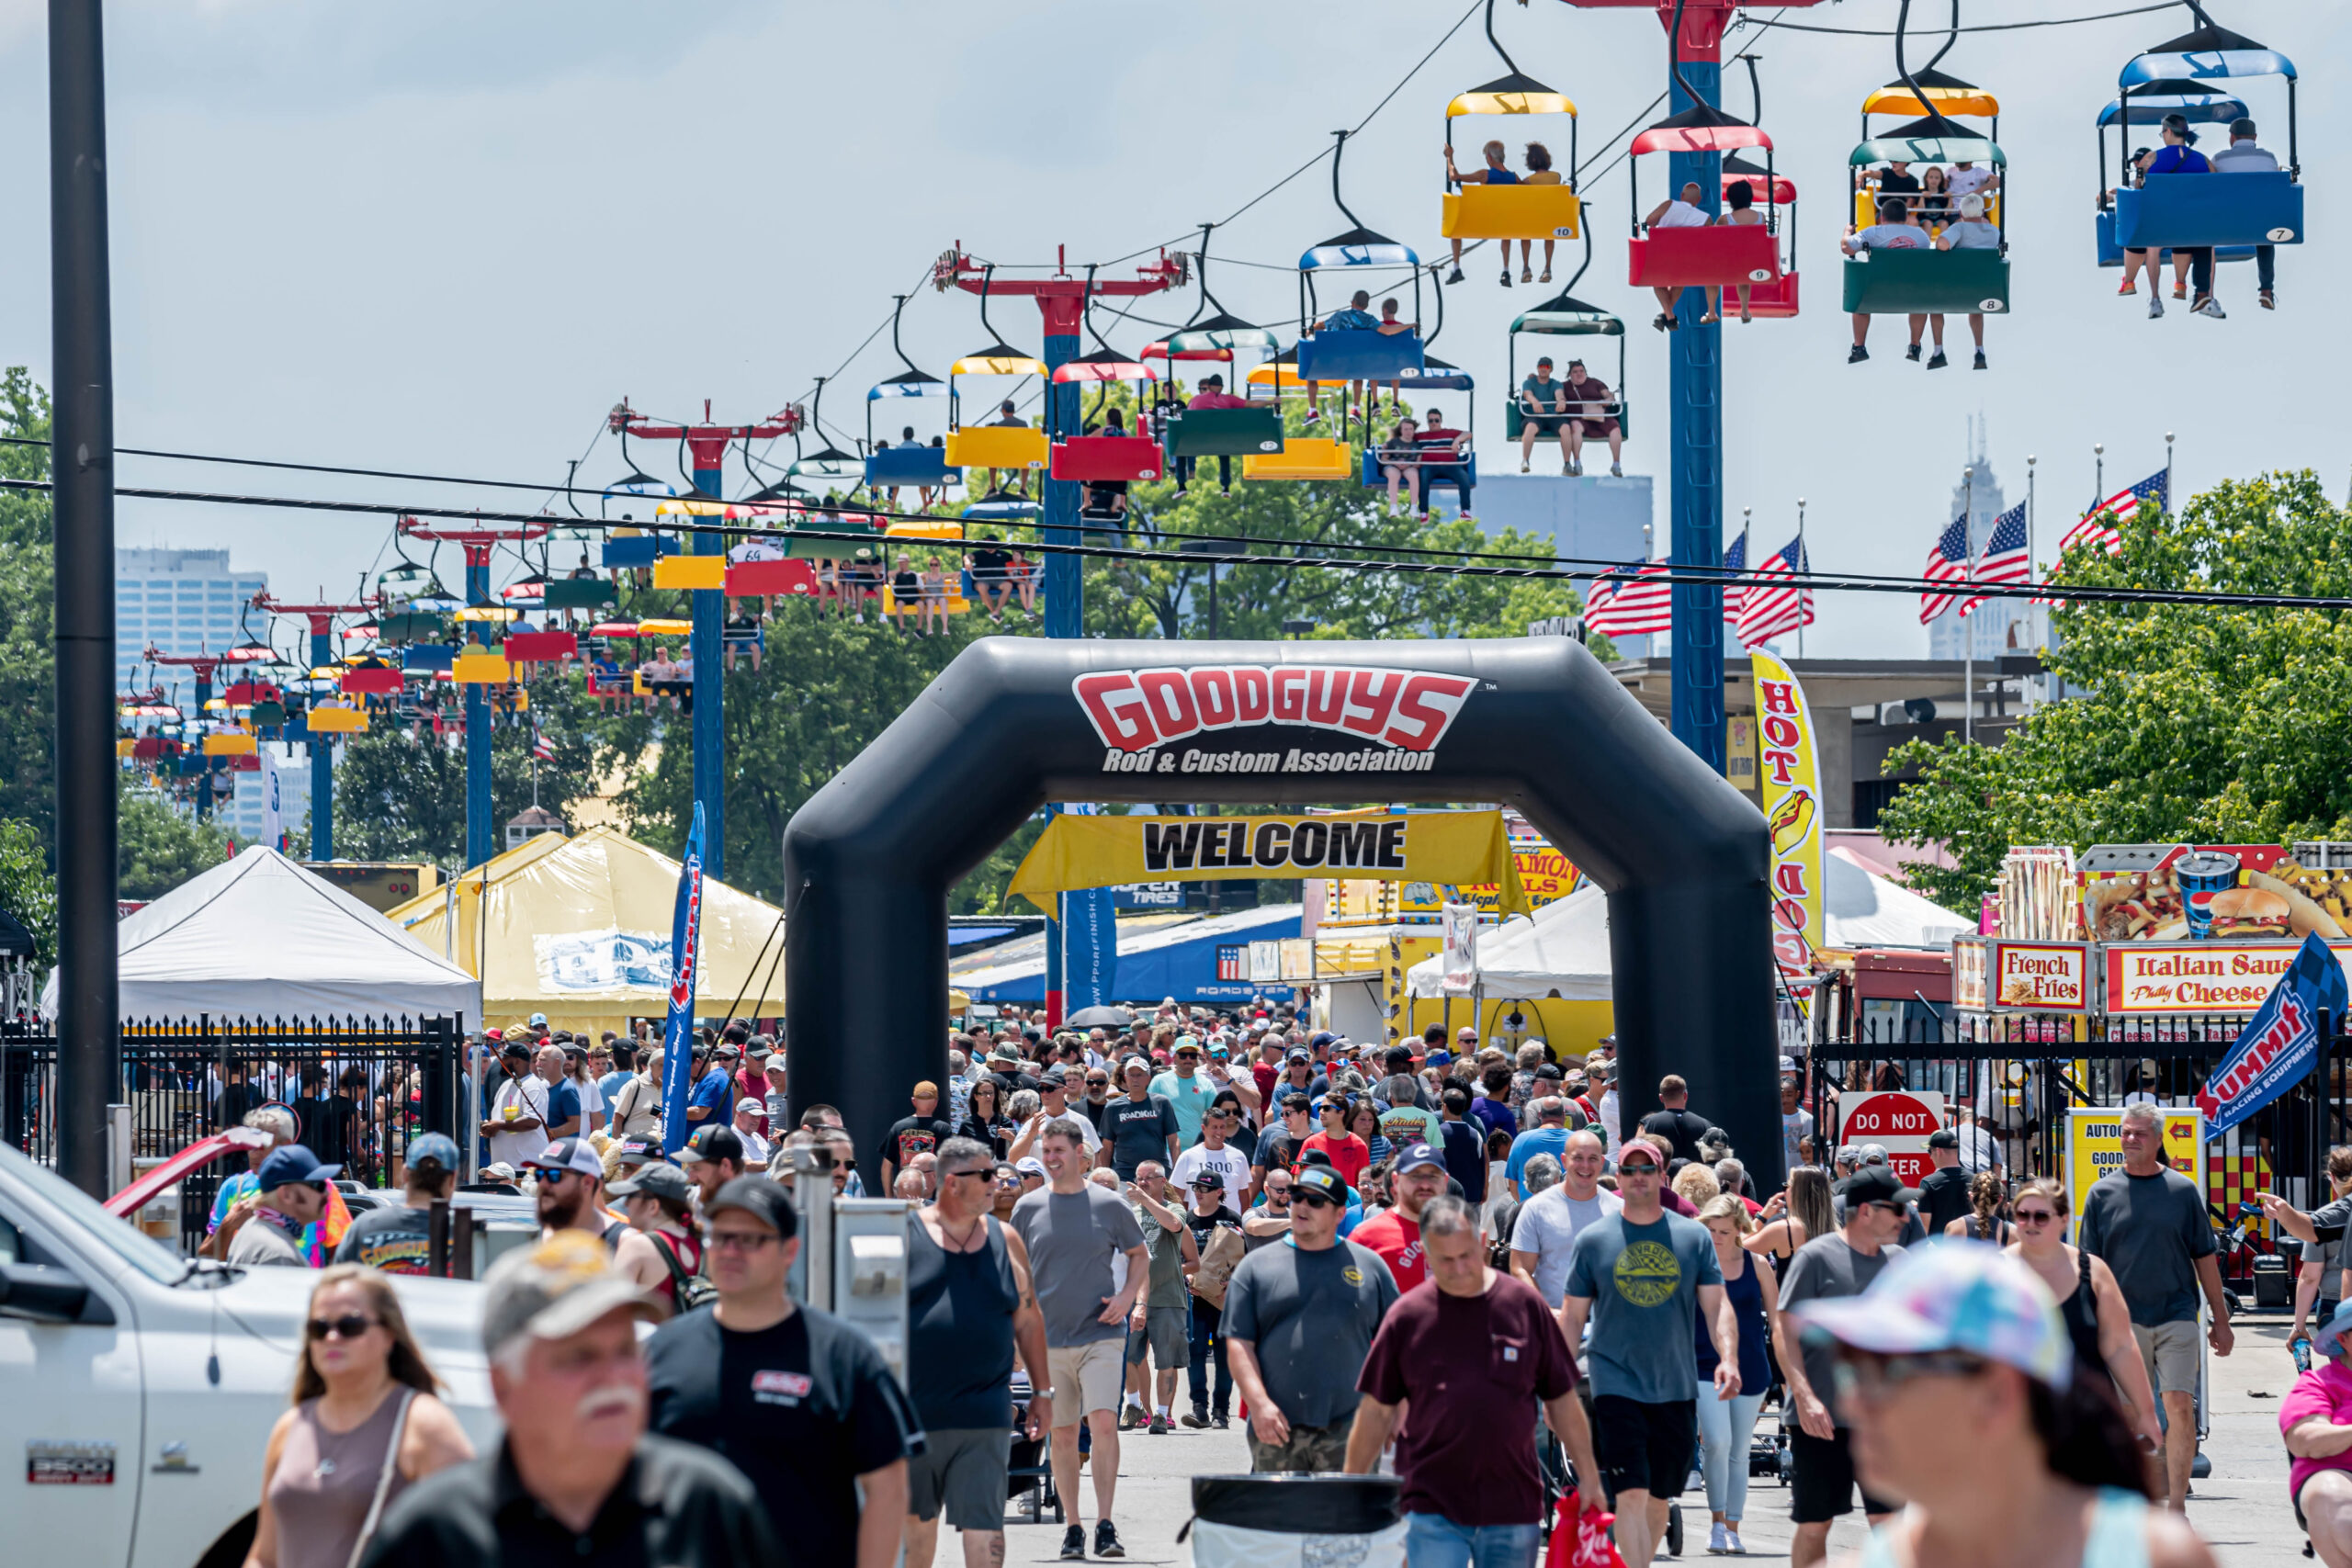 Goodguys Releases 2023 Event Schedule | THE SHOP